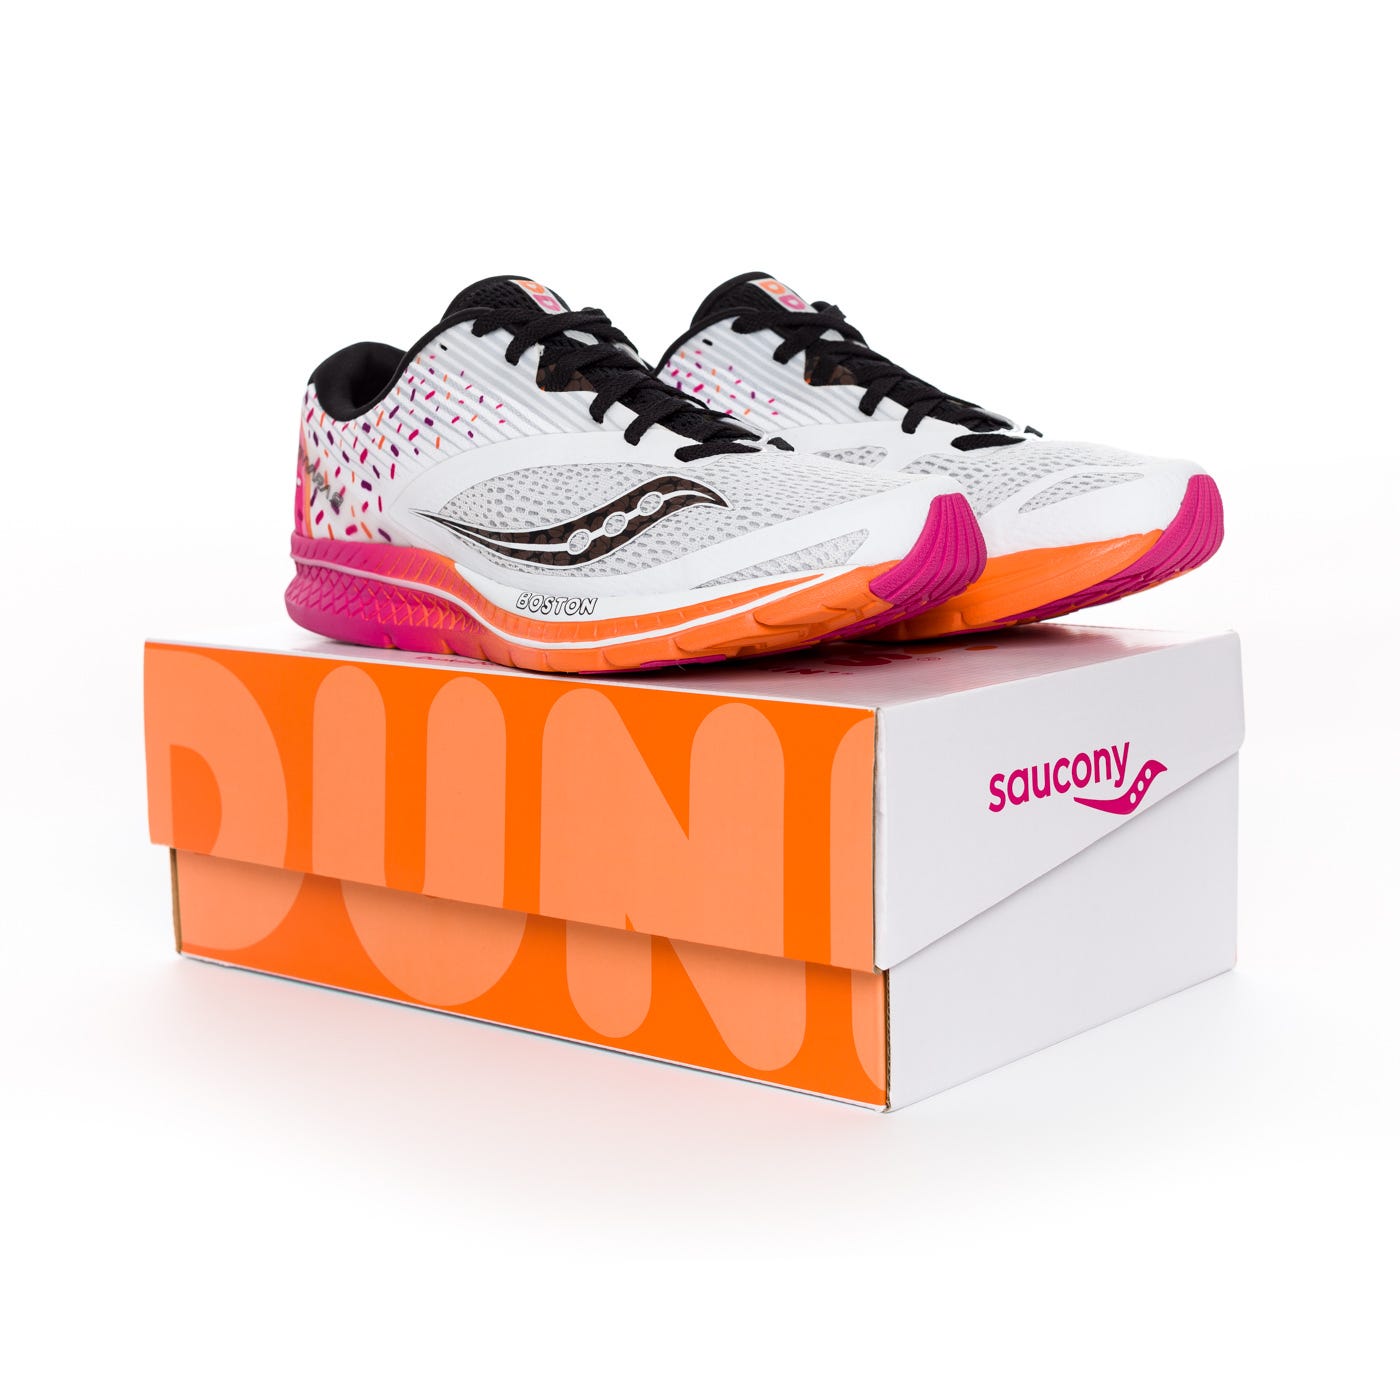 saucony dunkin donuts sweepstakes